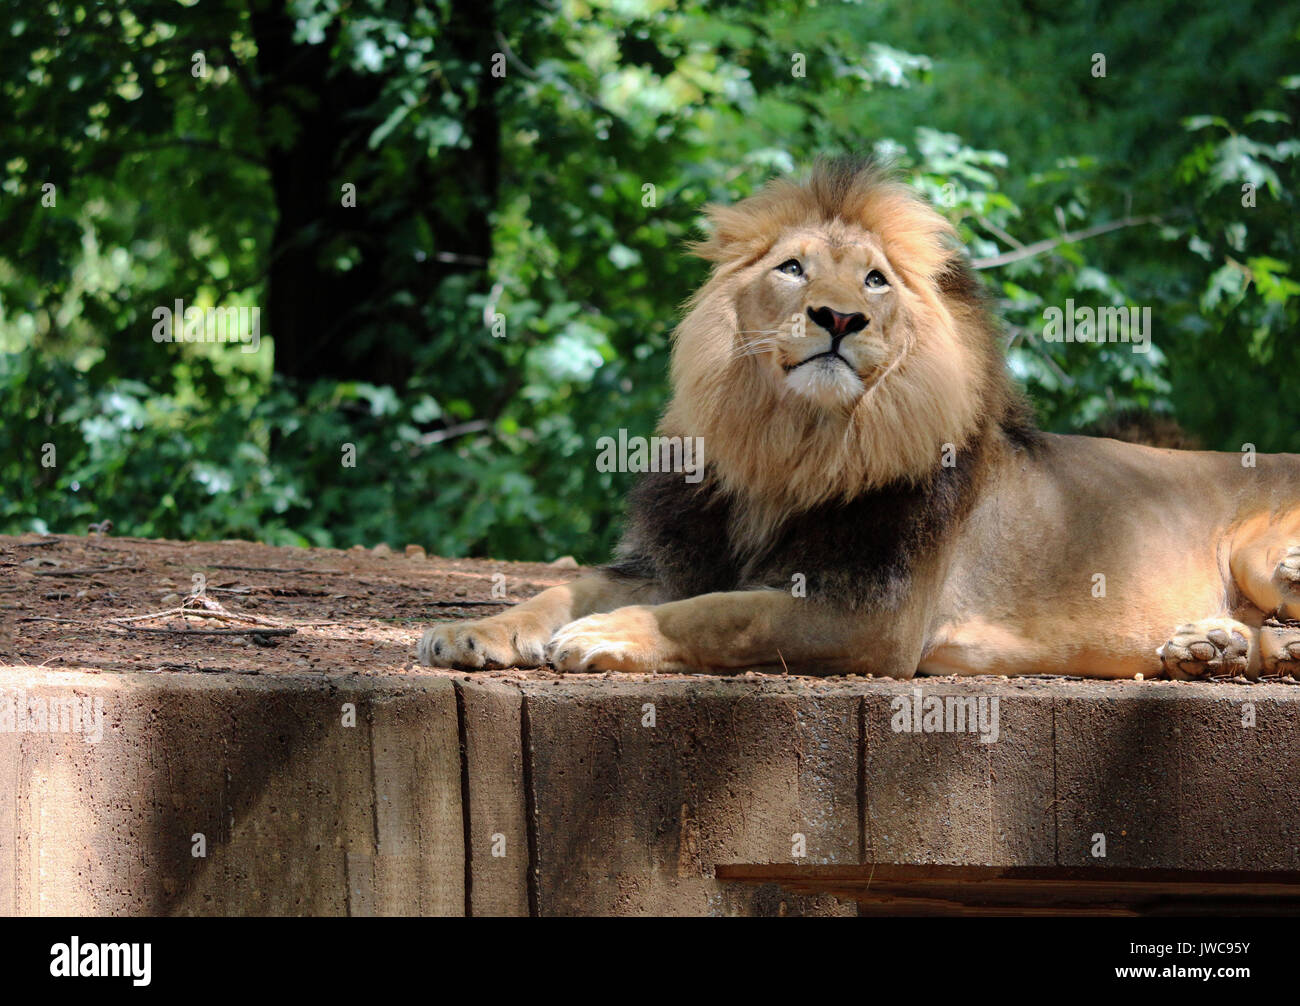 A Lion Relaxing in his Habitat with A Leafy Green Background. Stock Photo